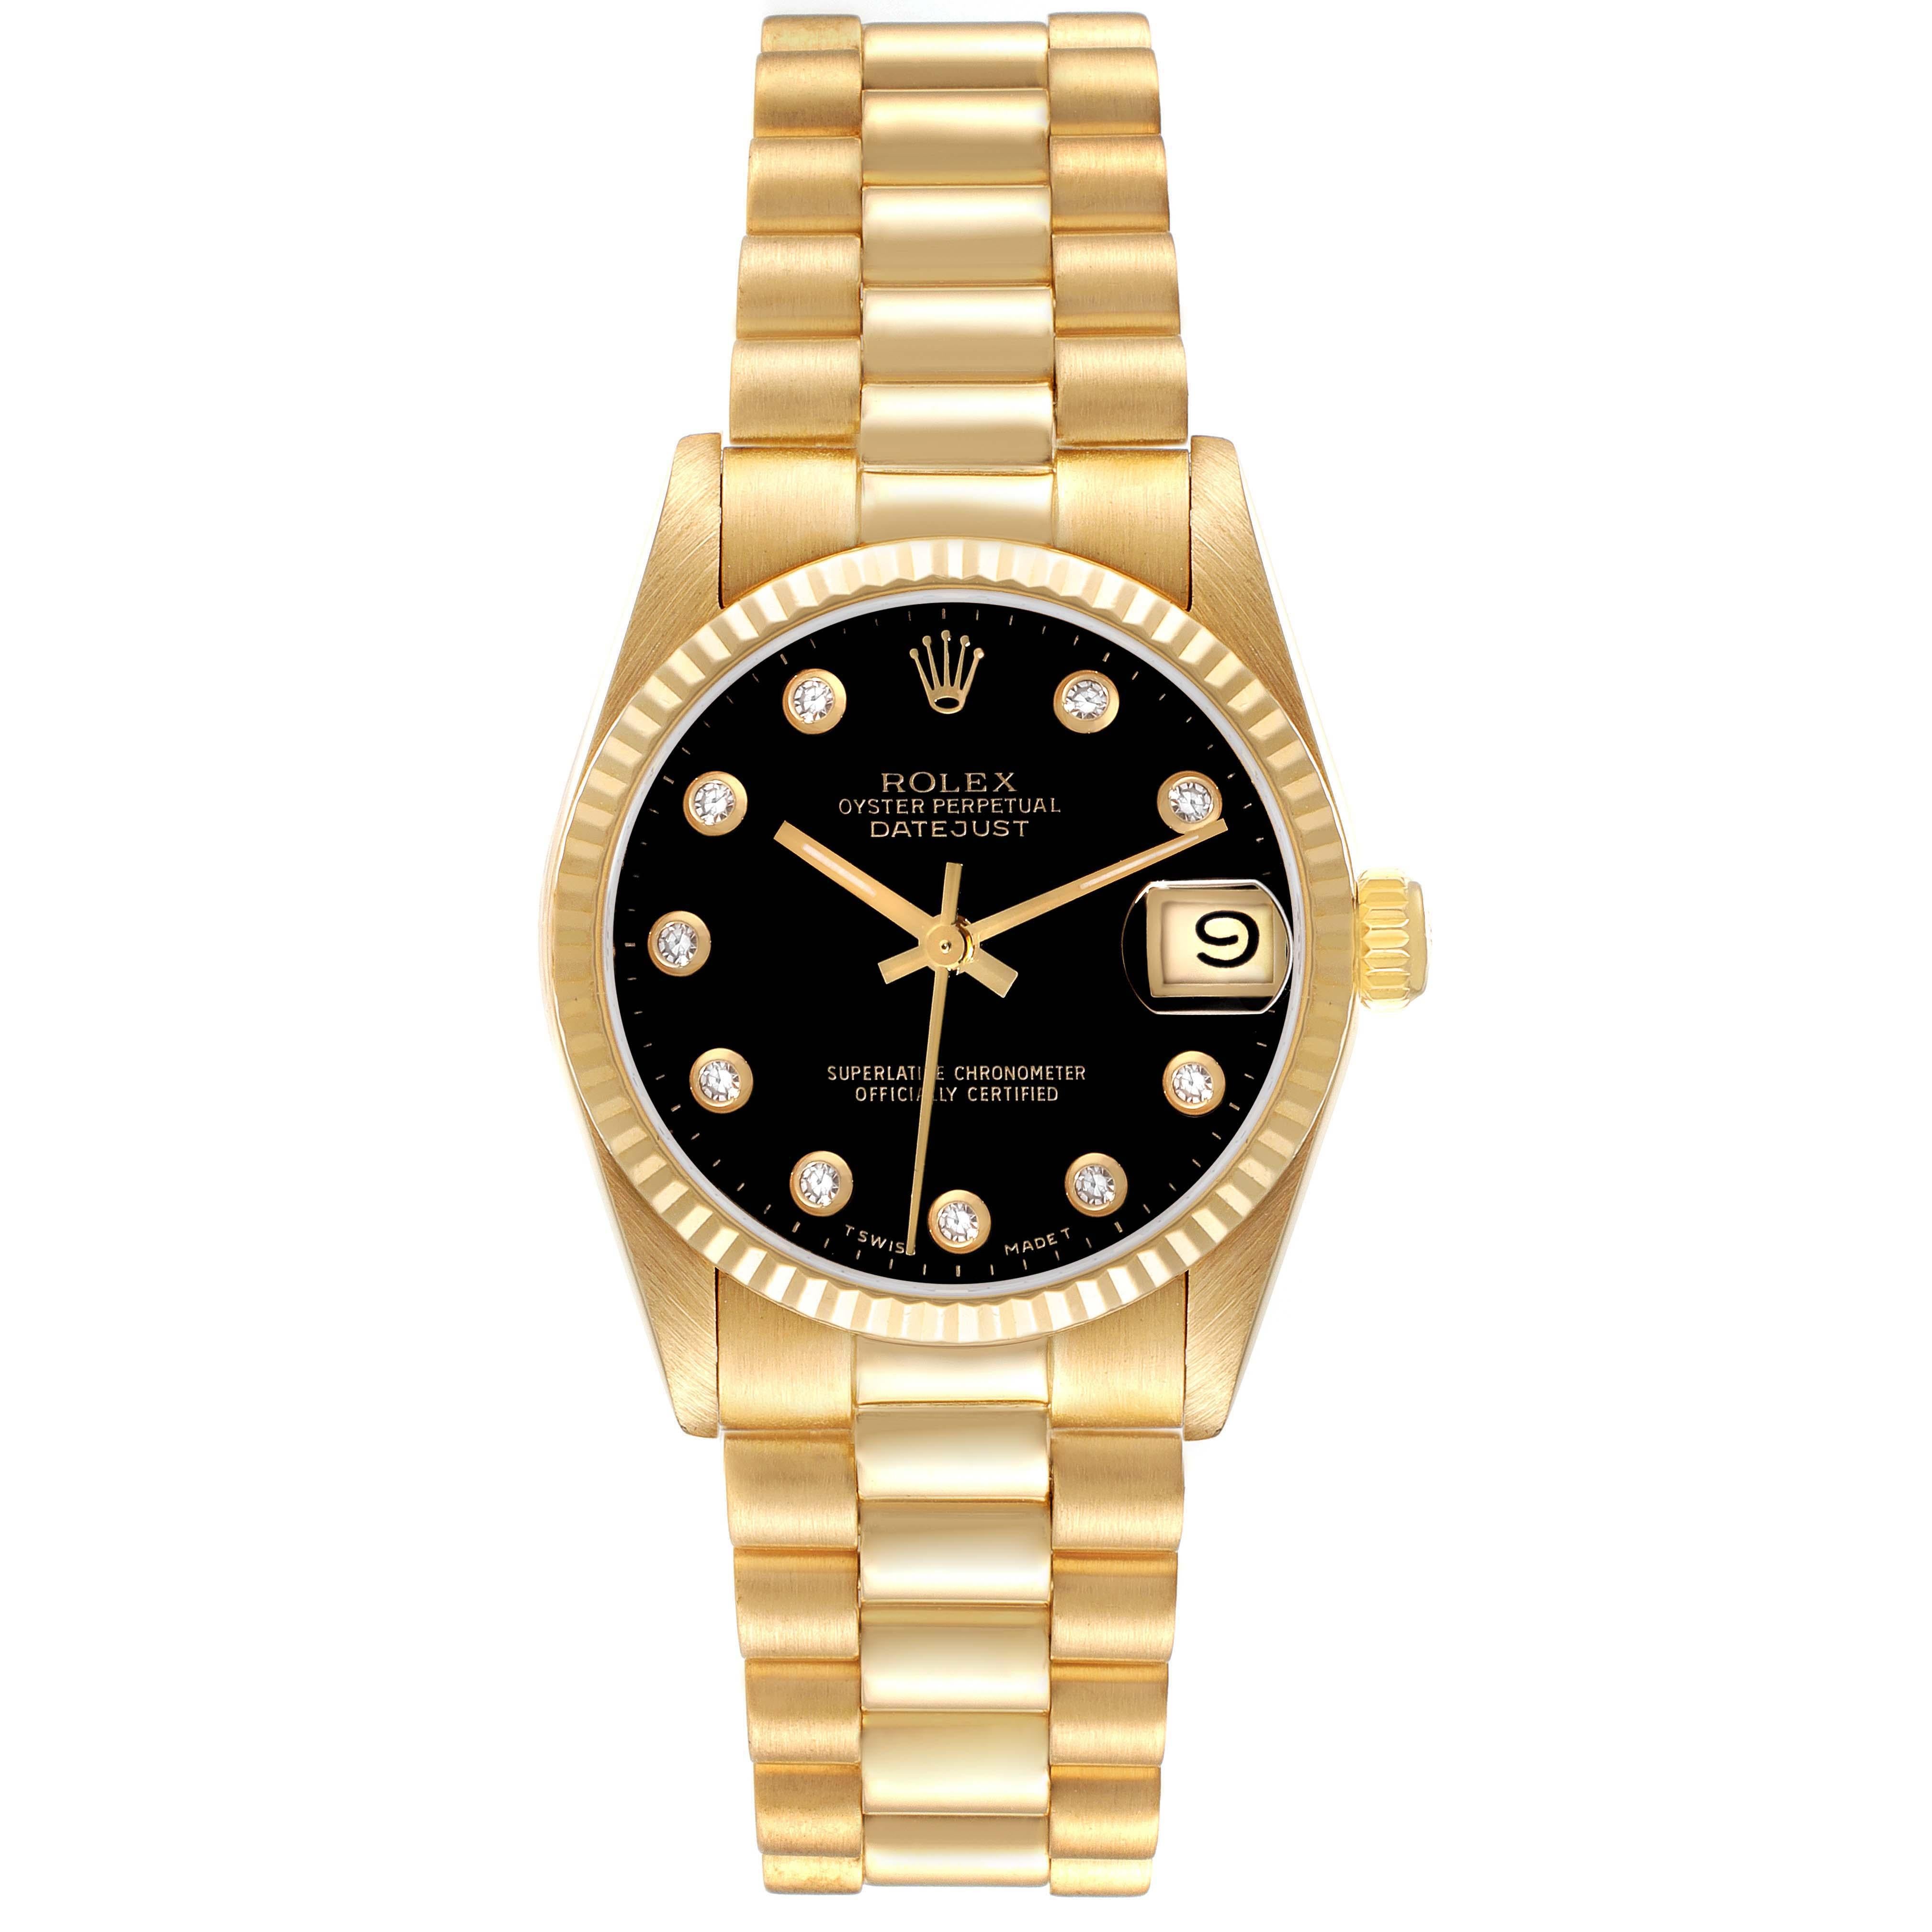 Rolex President Midsize Yellow Gold Onyx Diamond Dial Ladies Watch 68278. Officially certified chronometer automatic self-winding movement. 18k yellow gold oyster case 31.0 mm in diameter. Rolex logo on the crown. 18k yellow gold fluted bezel.